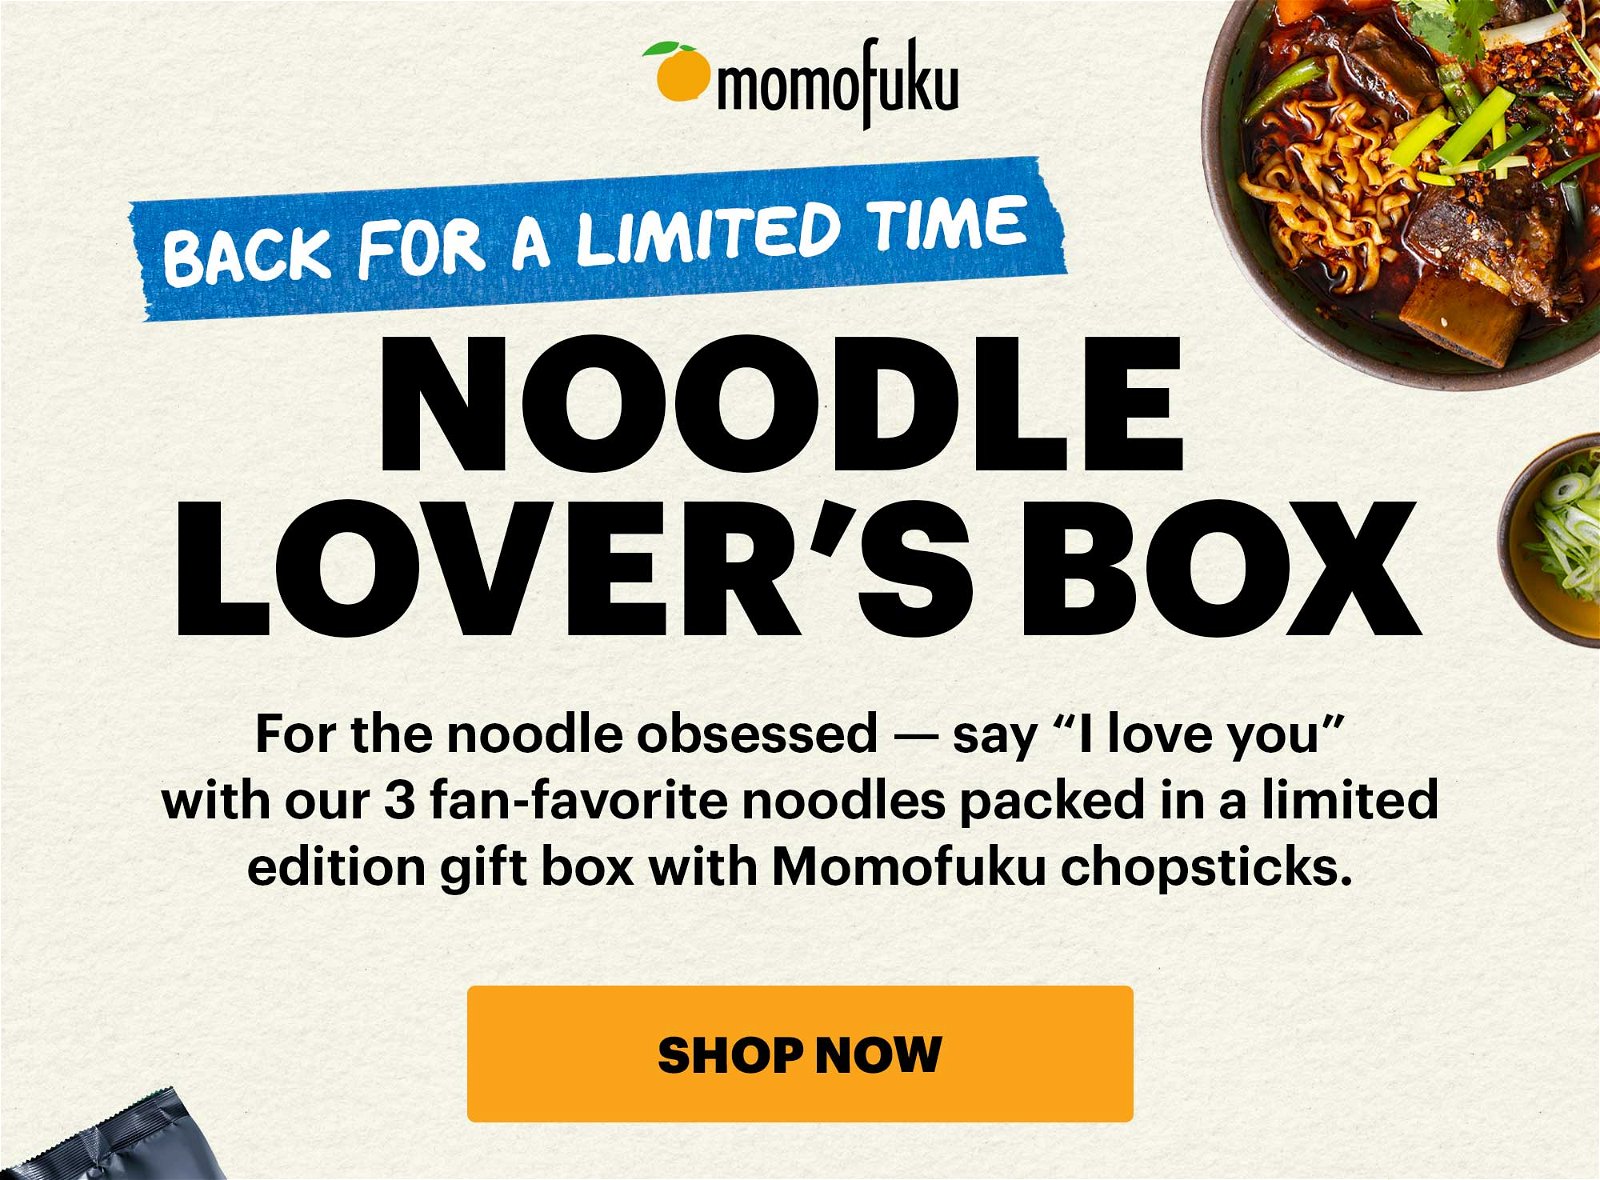 BACK FOR A LIMITED TIME. NOODLE LOVER'S BOX. For the noodle obsessed --- say "I love you" with our 3 fan-favorite noodles packed in a limited edition gift box with Momofuku chopsticks. SHOP NOW